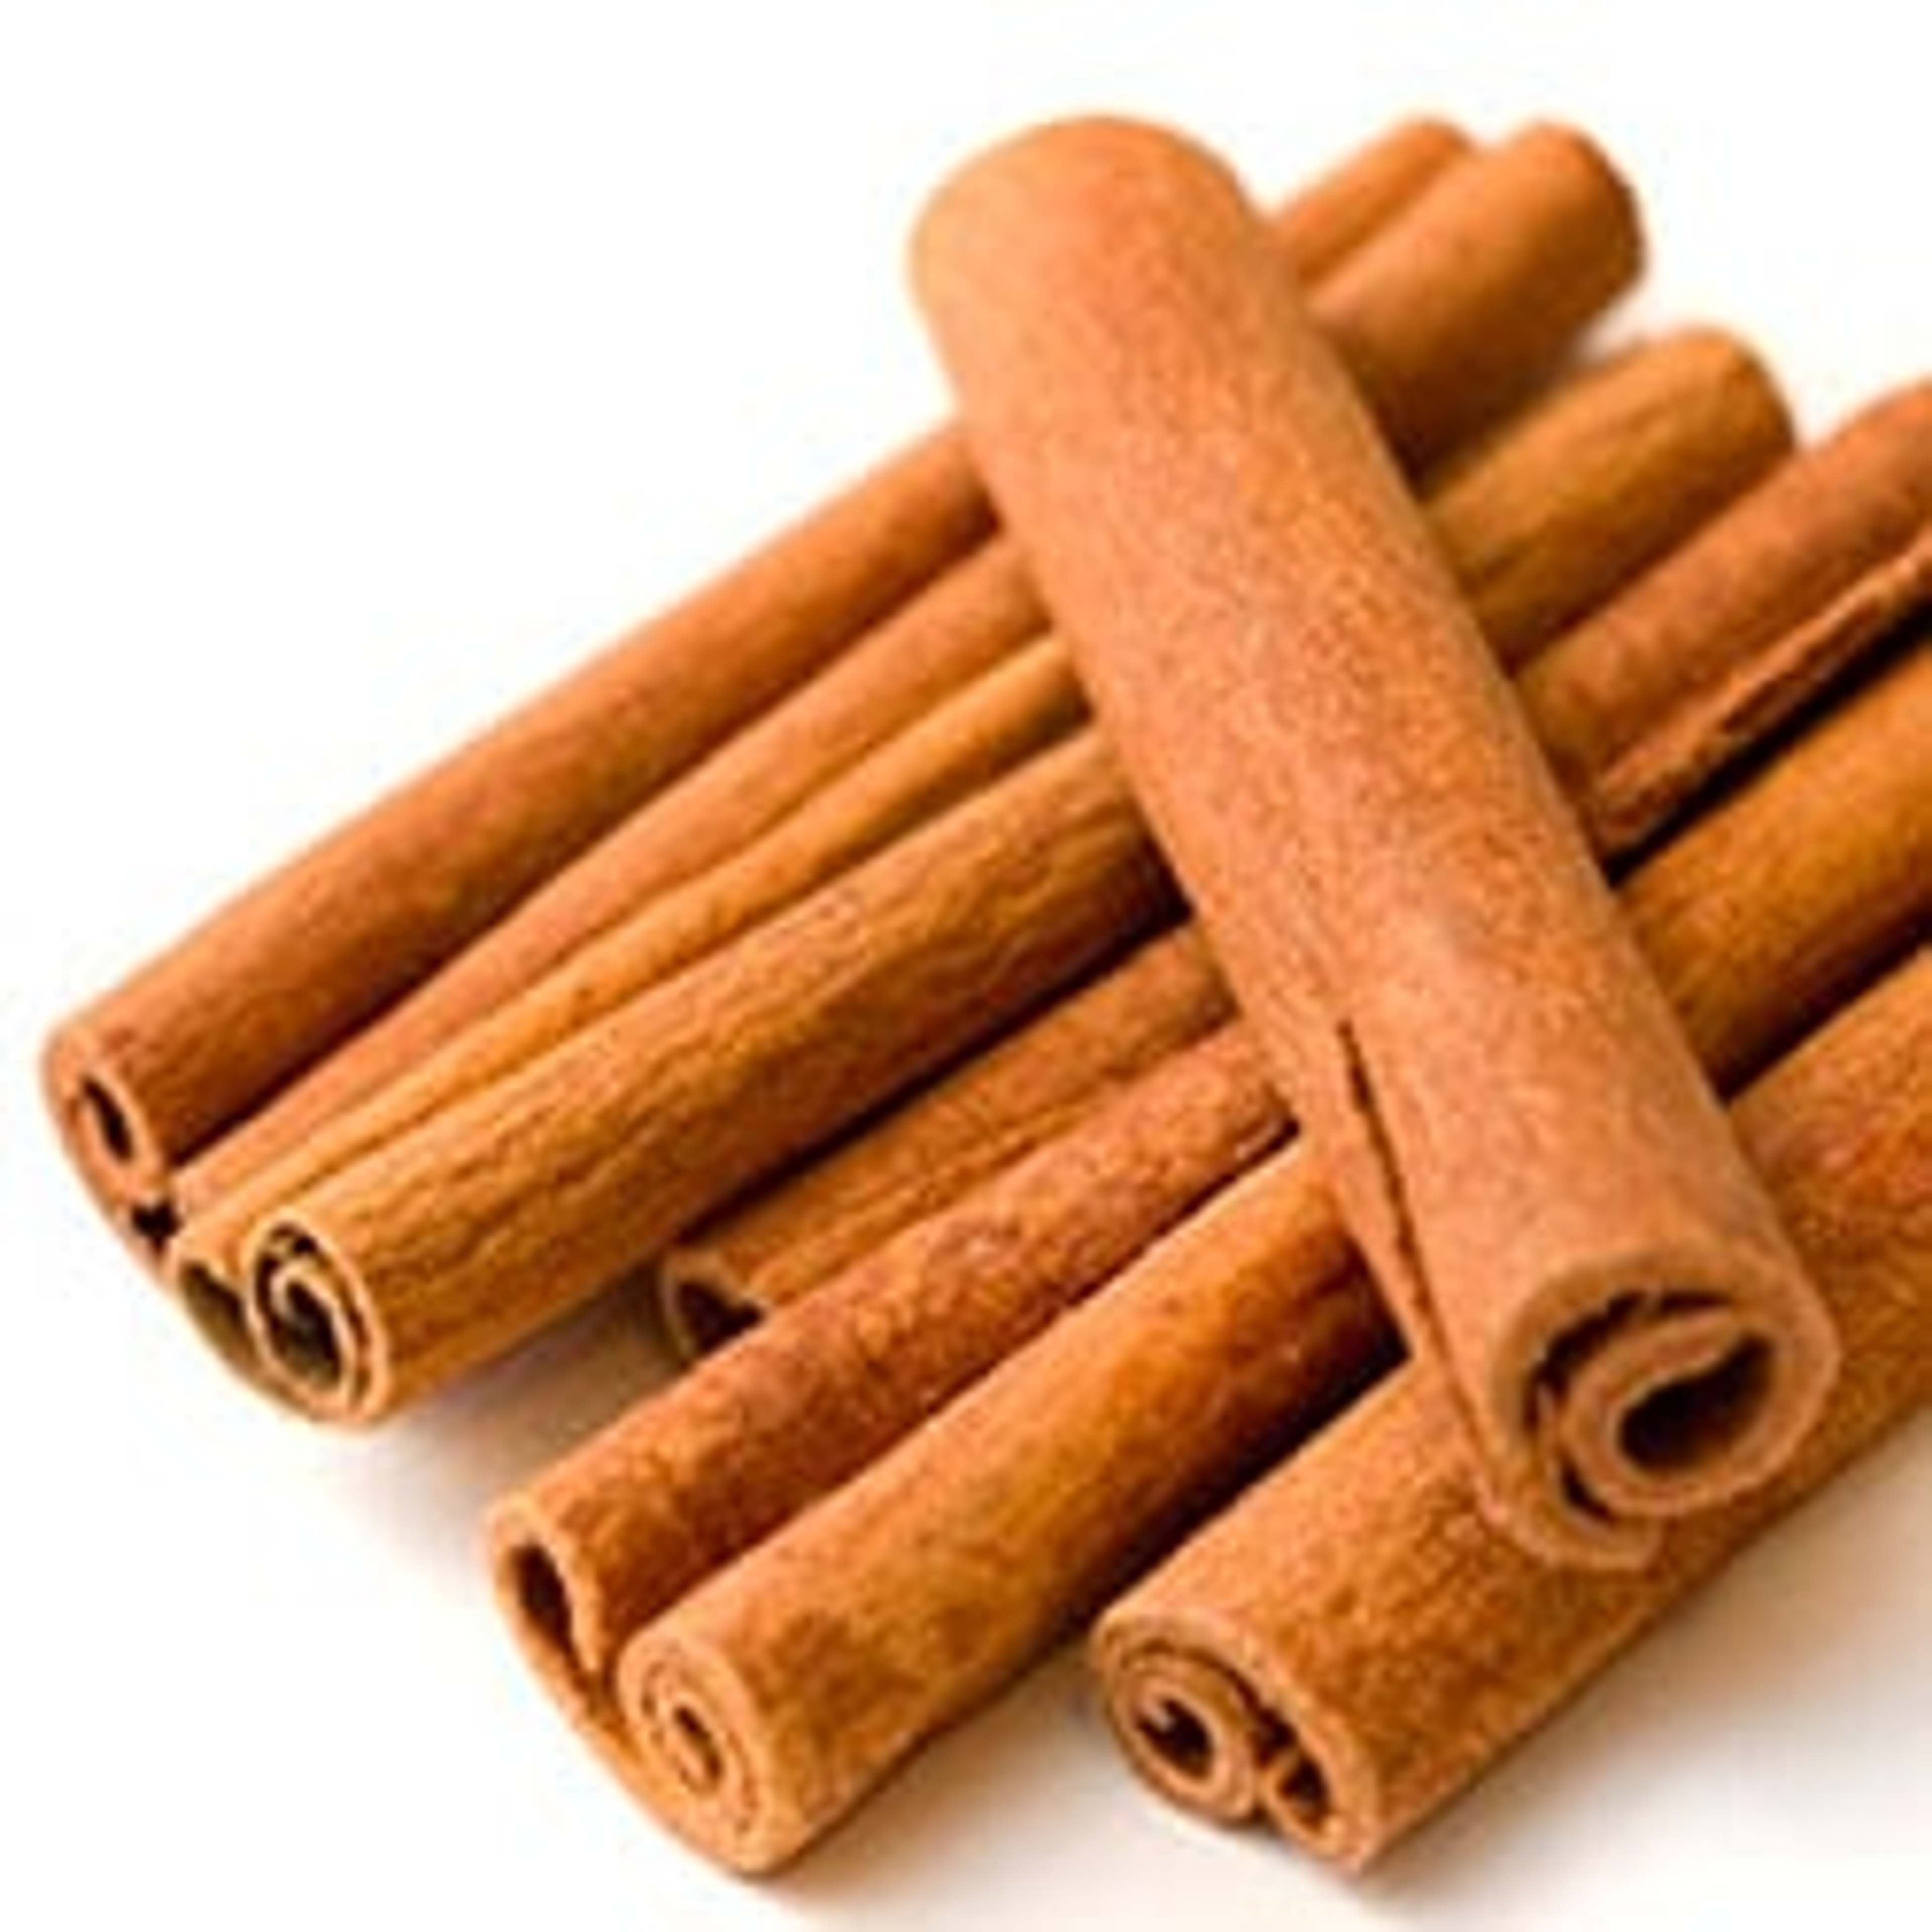 Studies show that cinnamon extract can reduce fasting blood sugar by 18 to 29%.